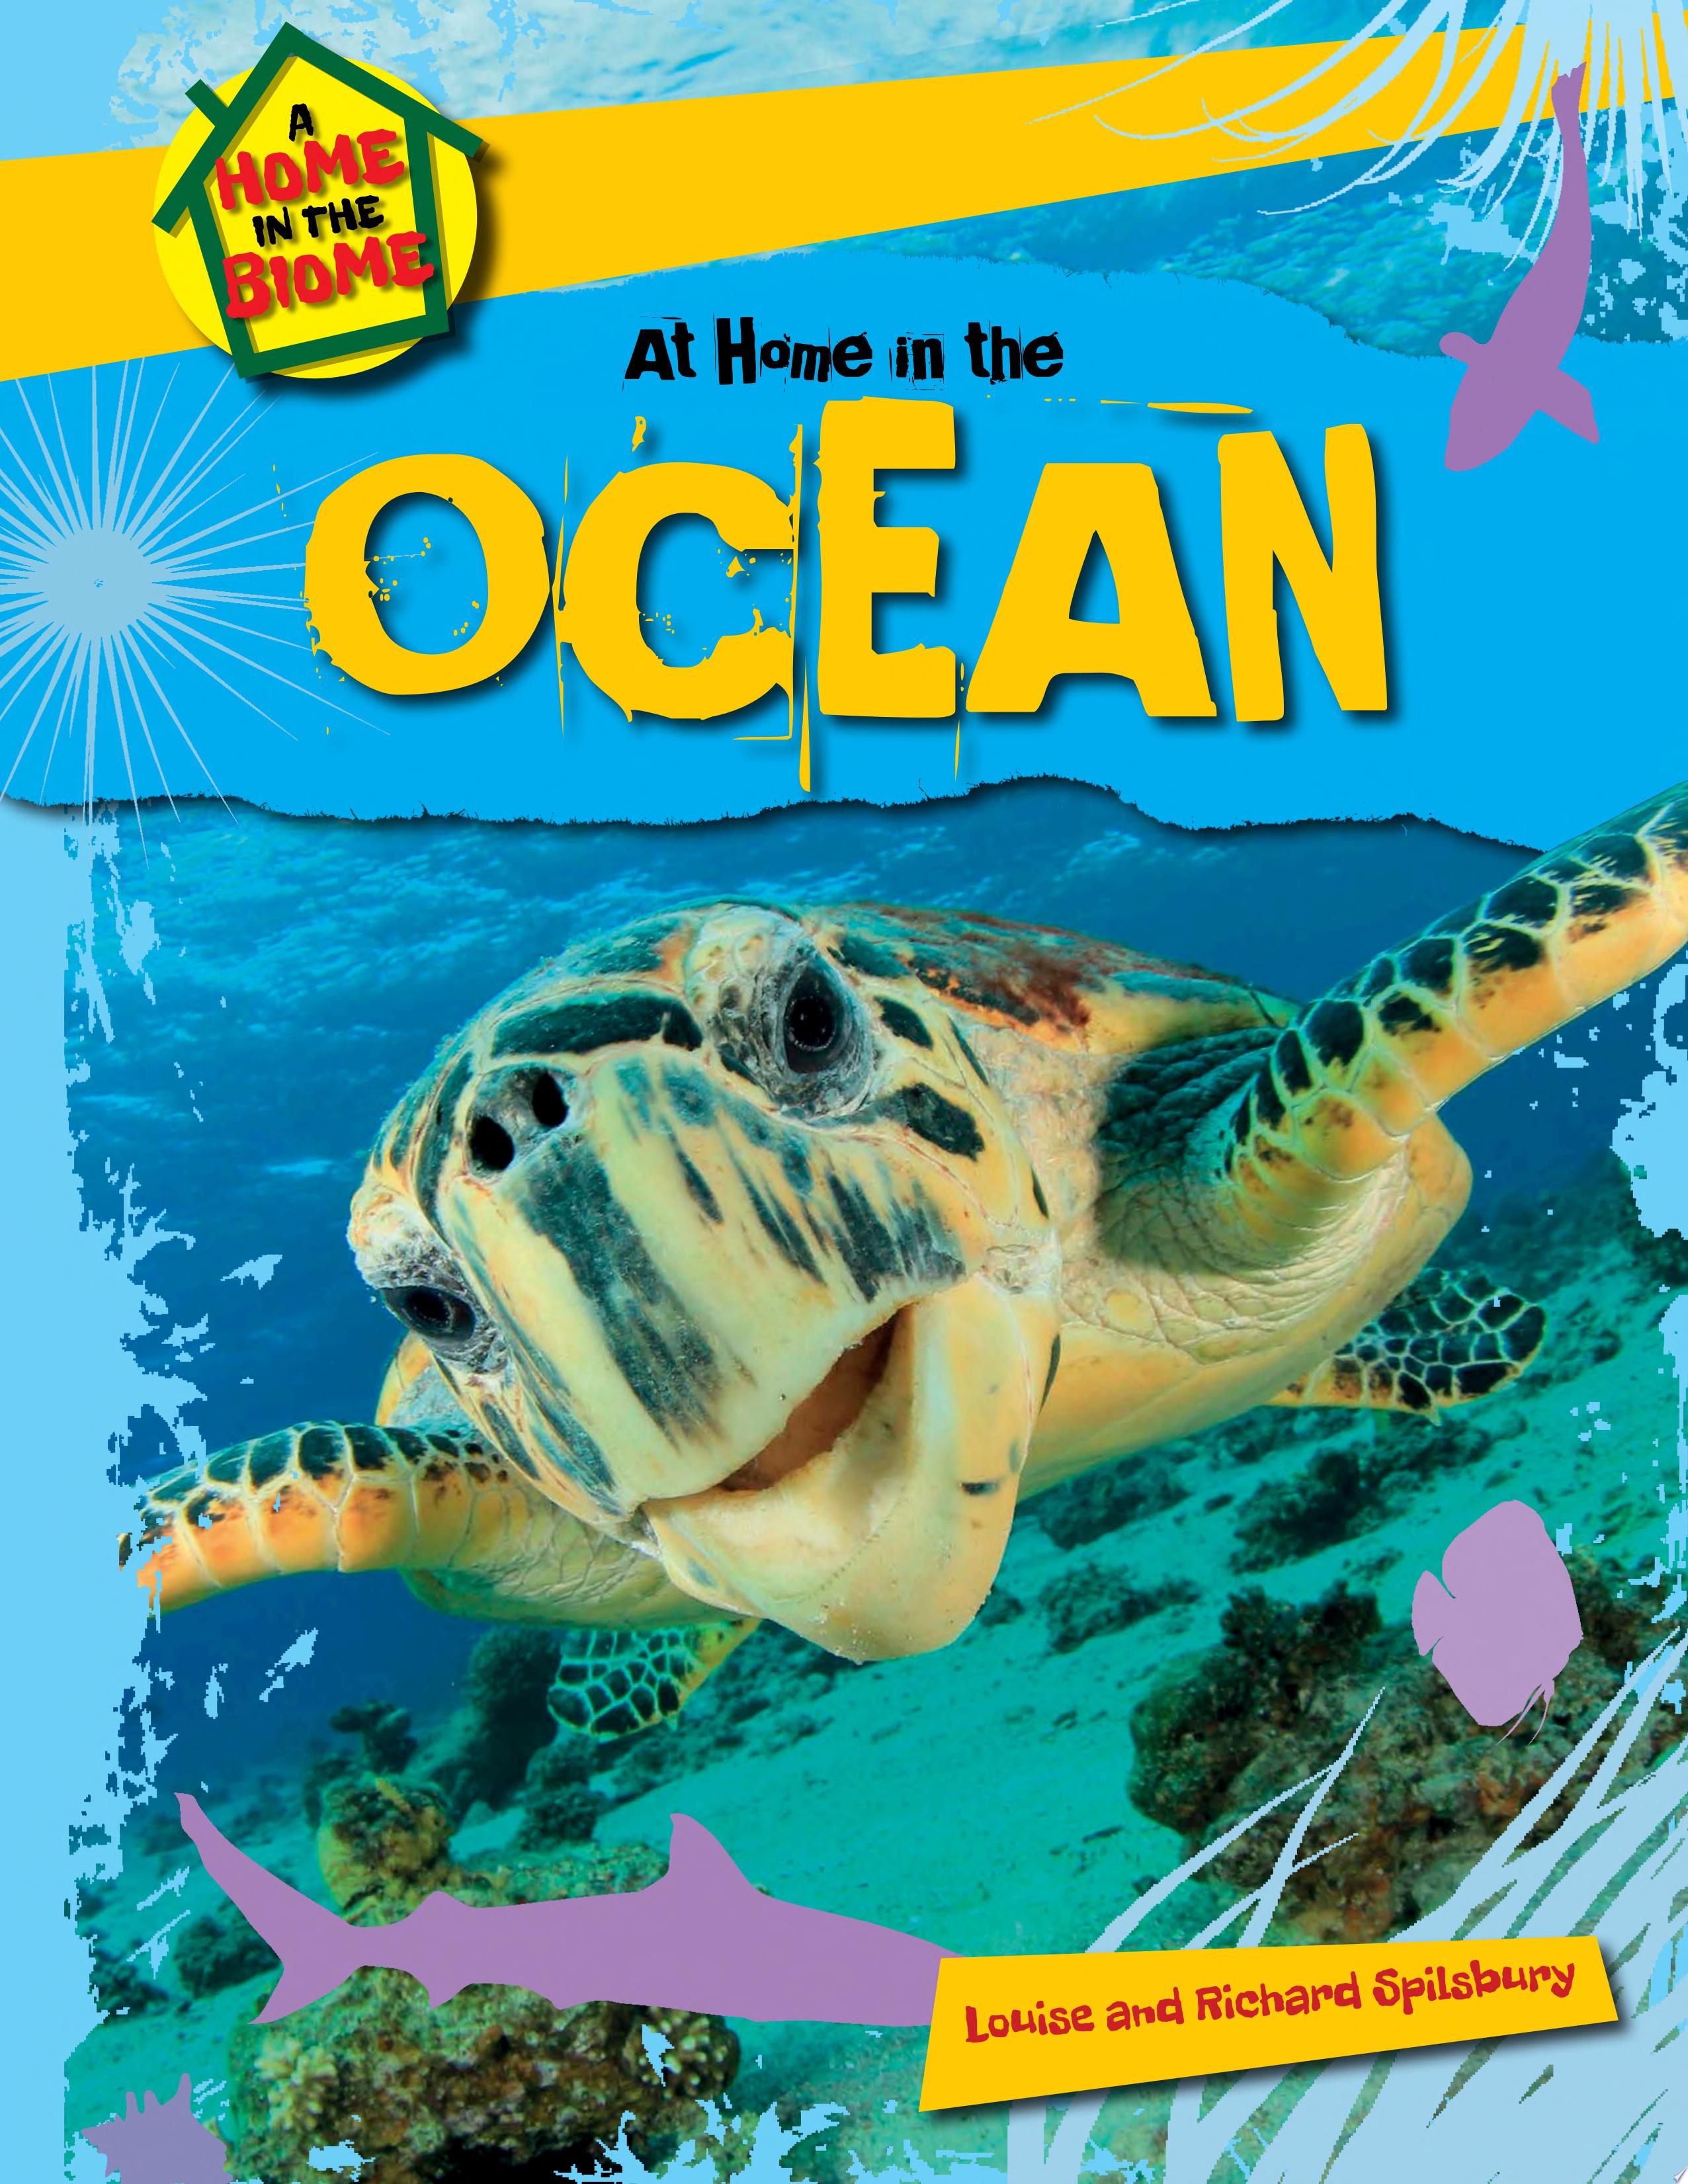 Image for "At Home in the Ocean"